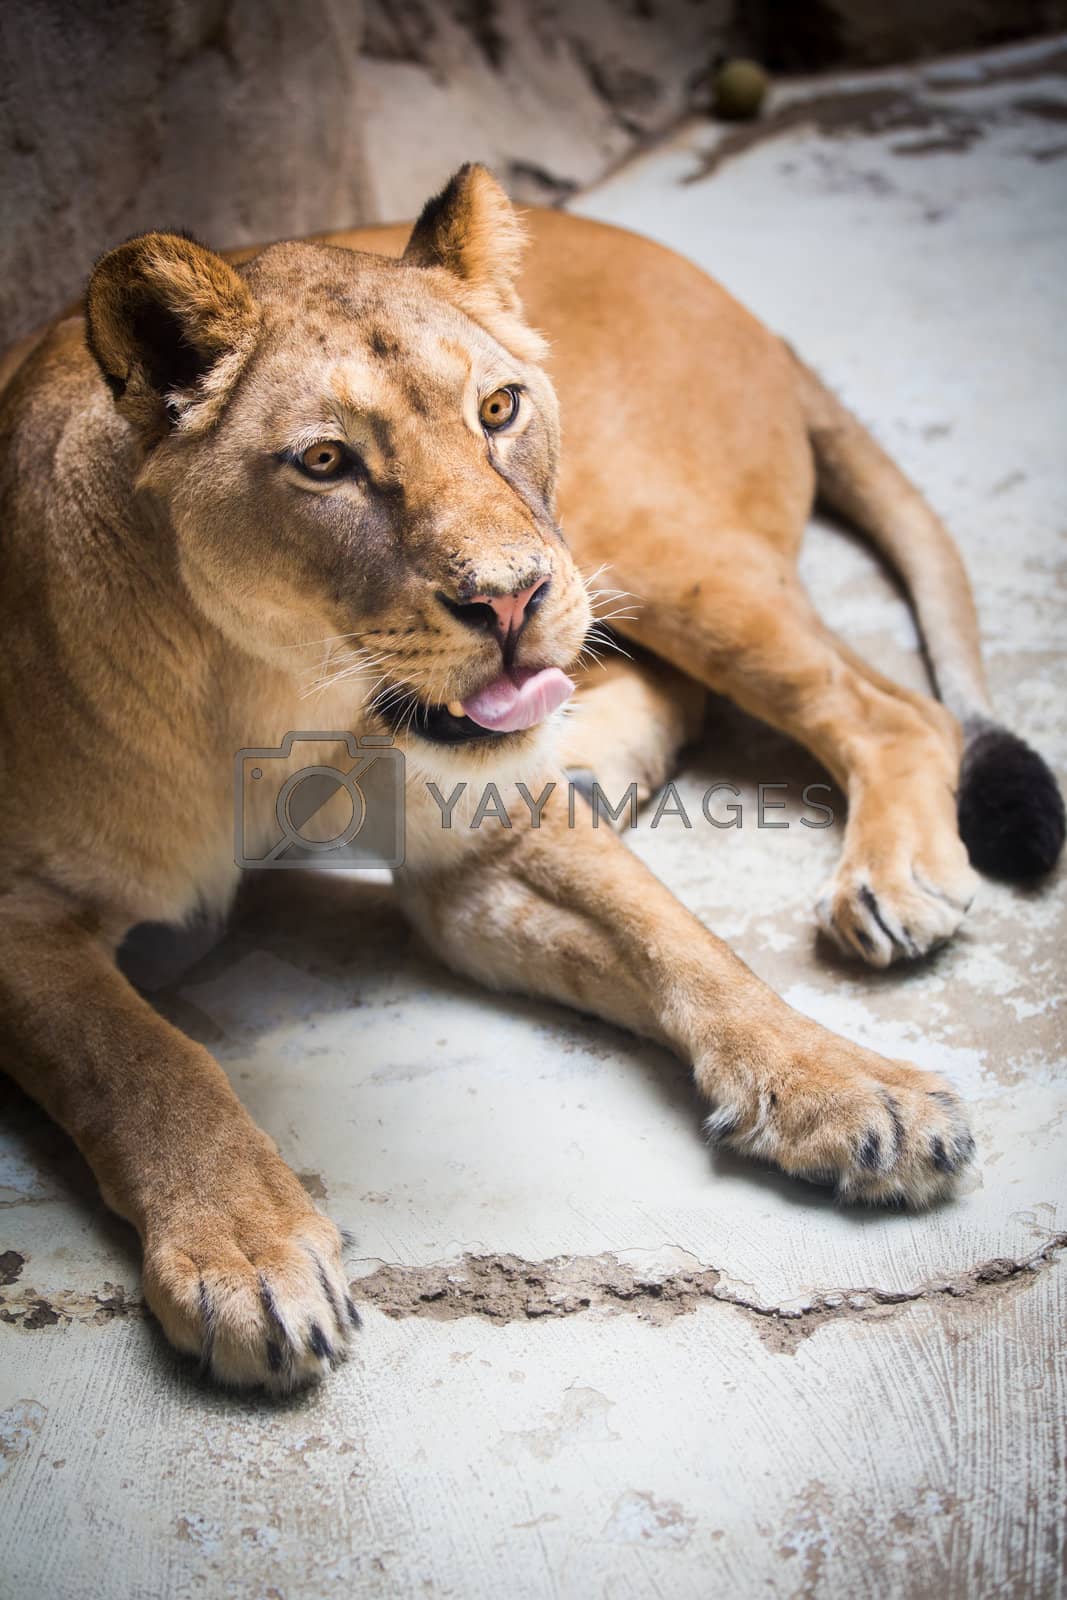 Royalty free image of Close-up portrait of a majestic lioness (Panthera Leo)  by viktor_cap